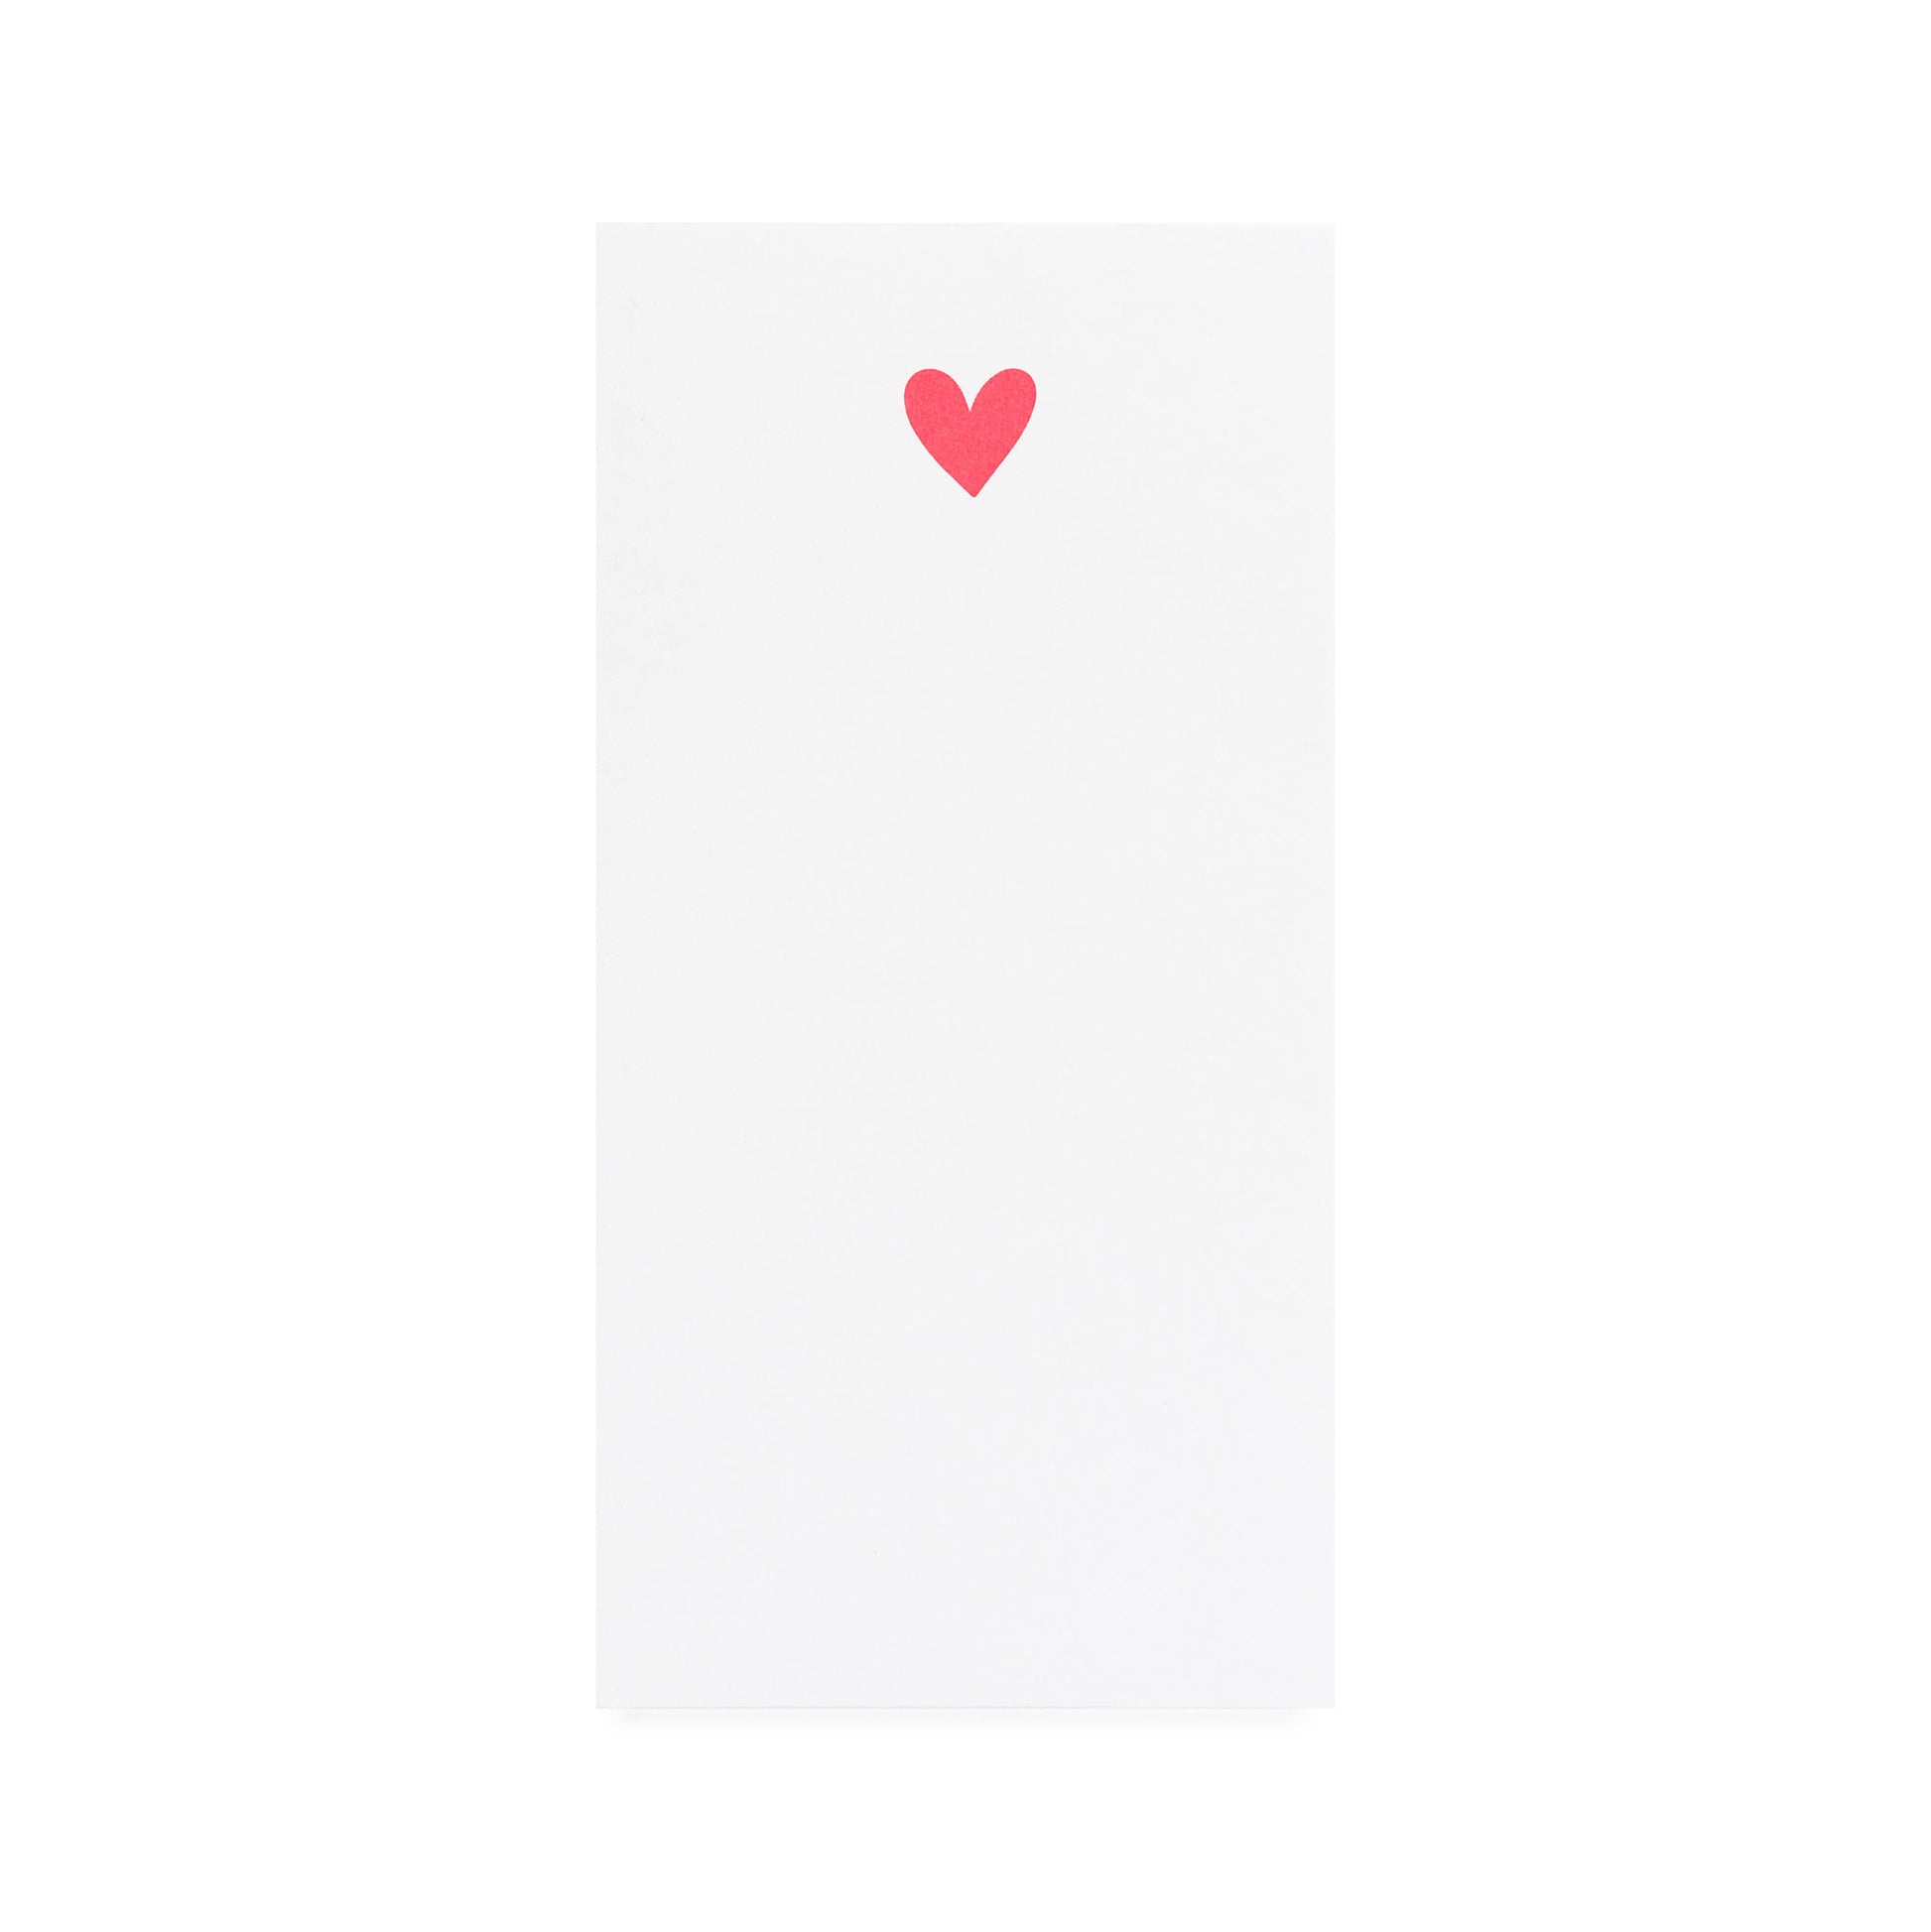 White notepad printed with neon pink heart